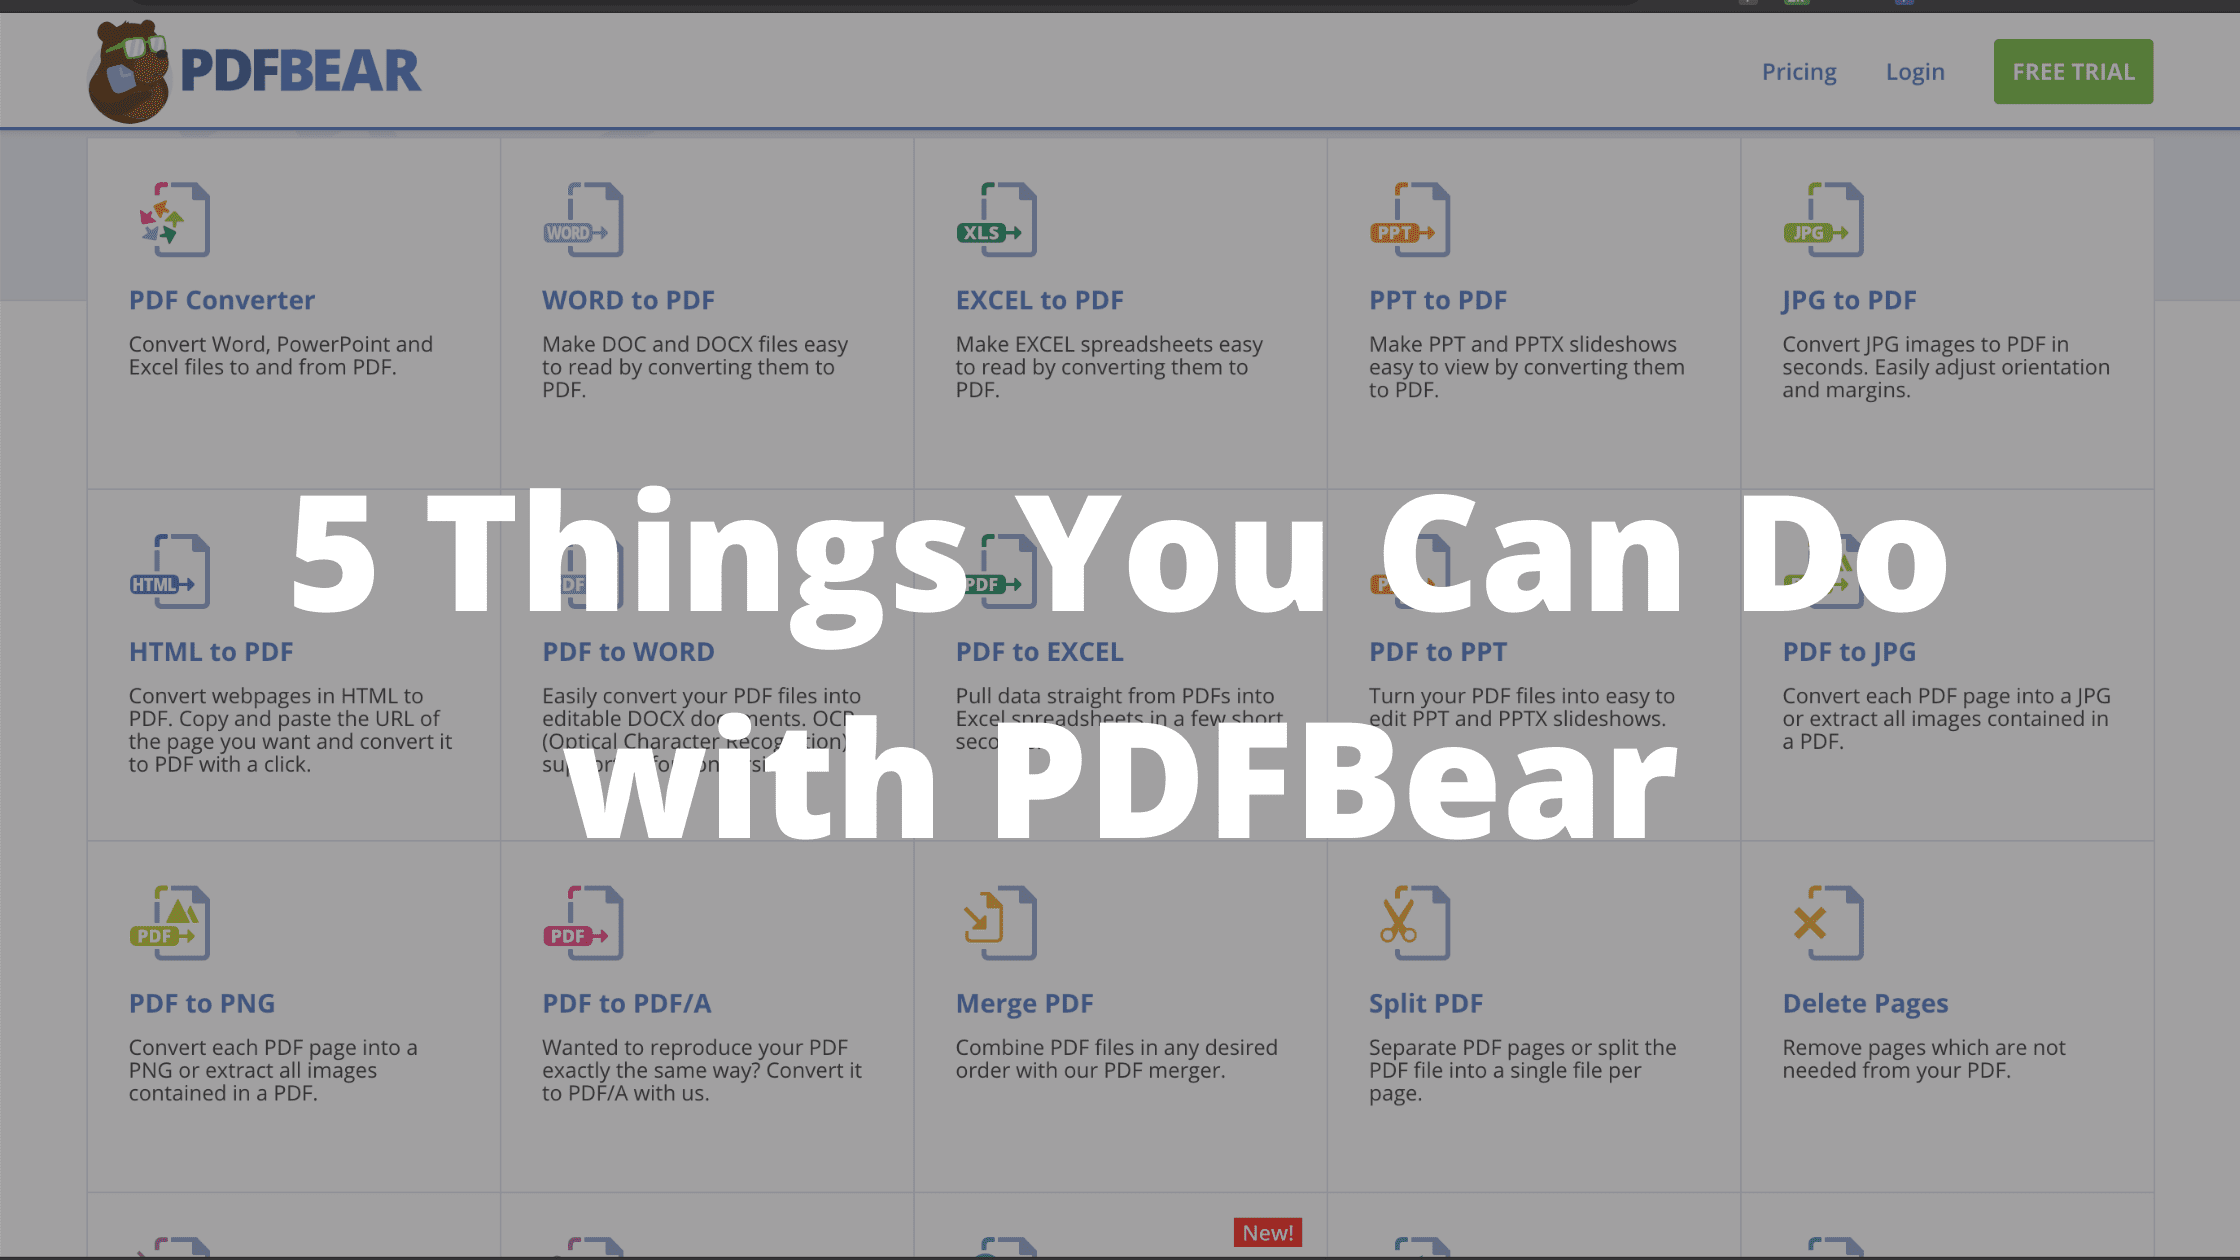 Things You Can Do with PDFBear